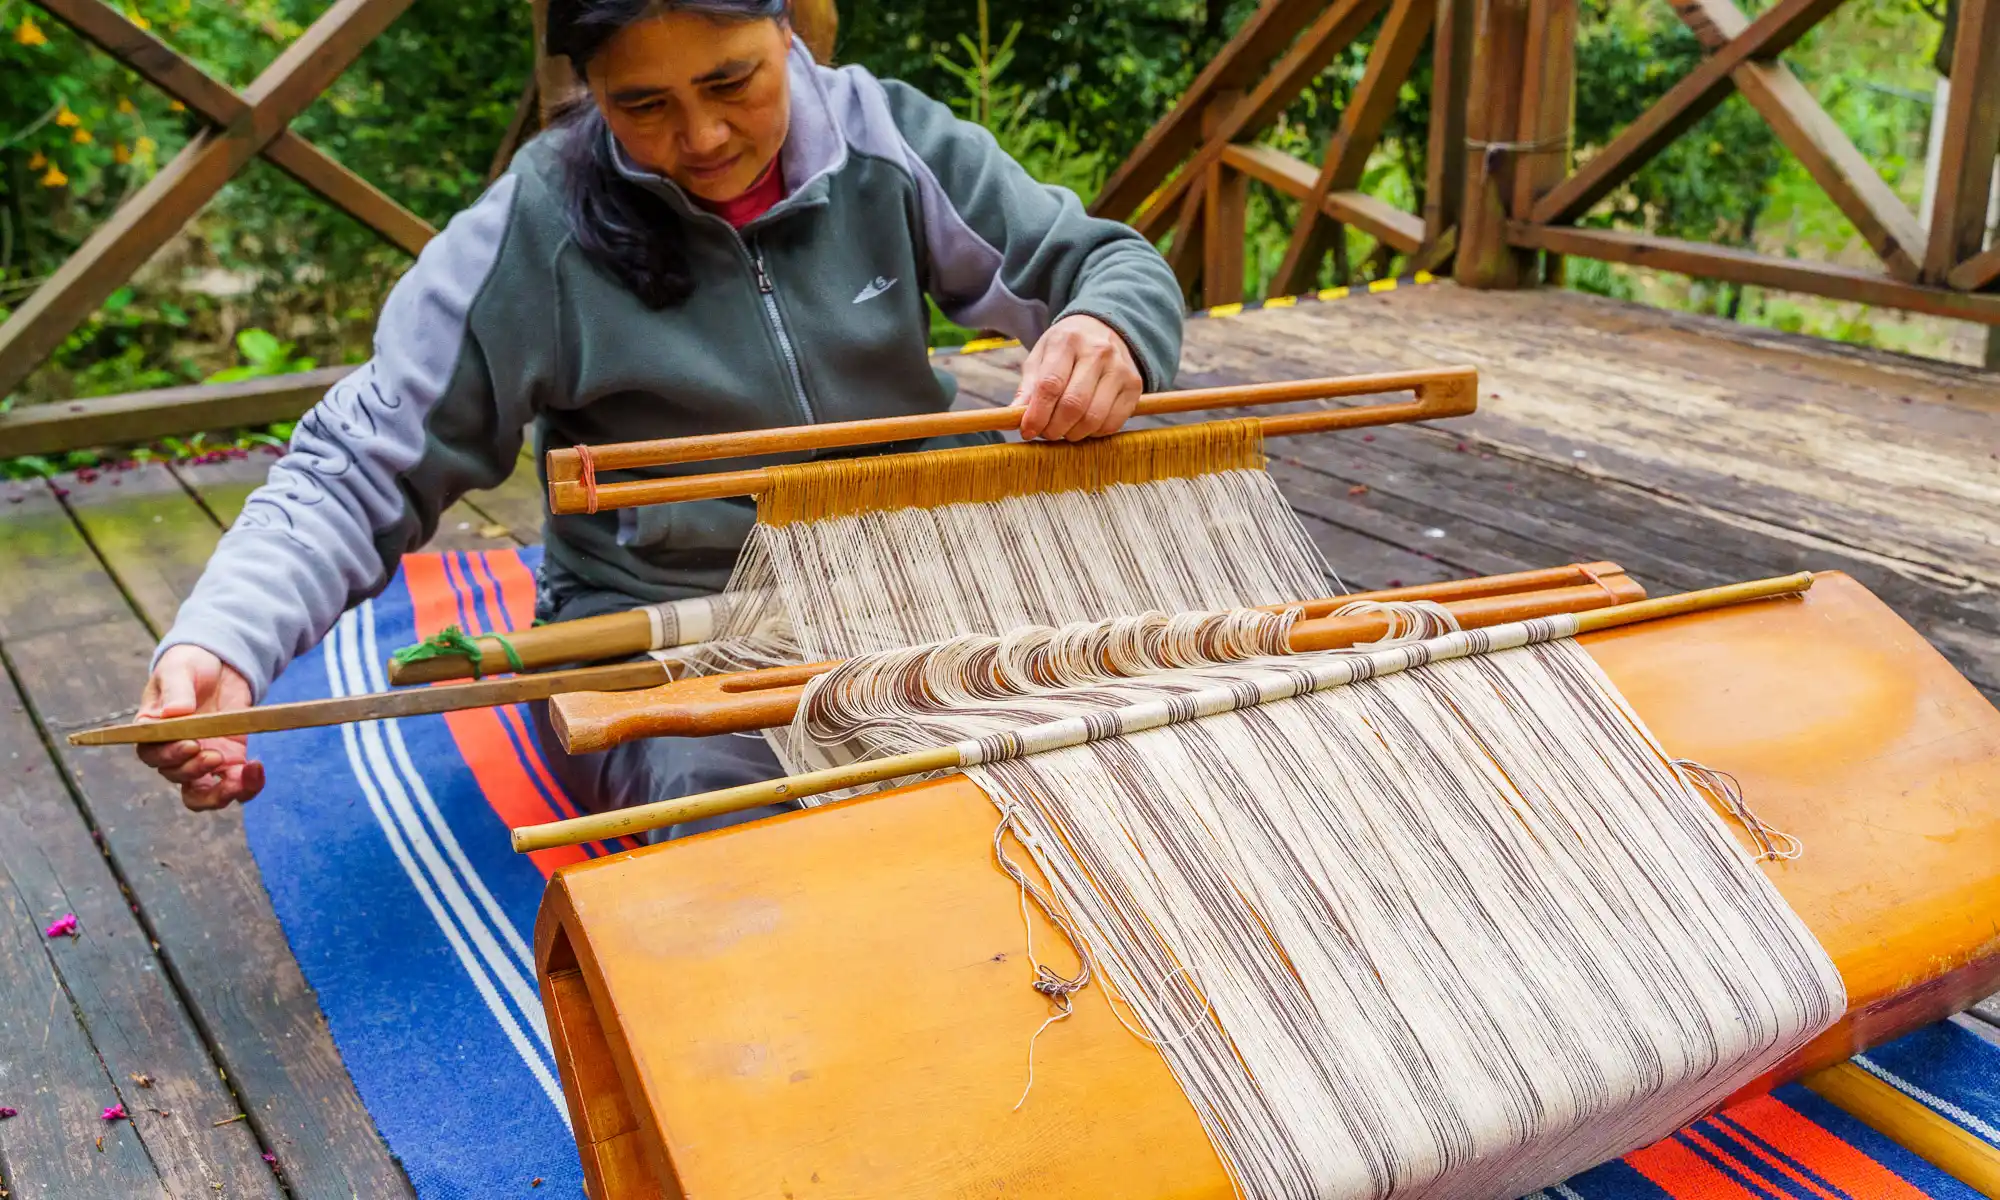 The owner of Raisinay Workshop demonstrates weaving using a traditional atayal loom.